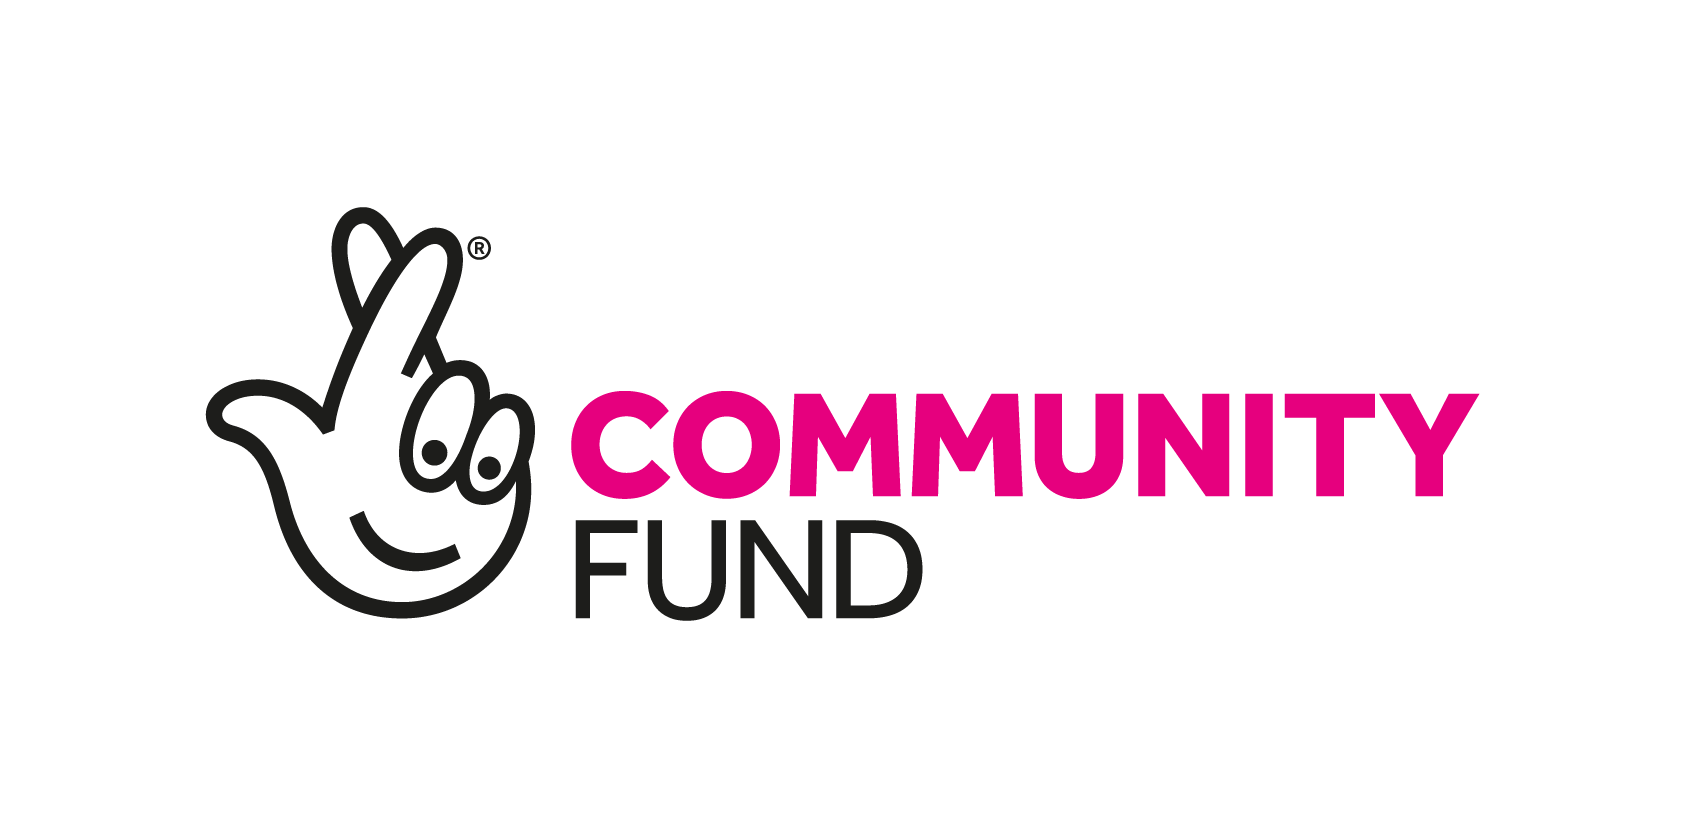 Funded by The Community Fund